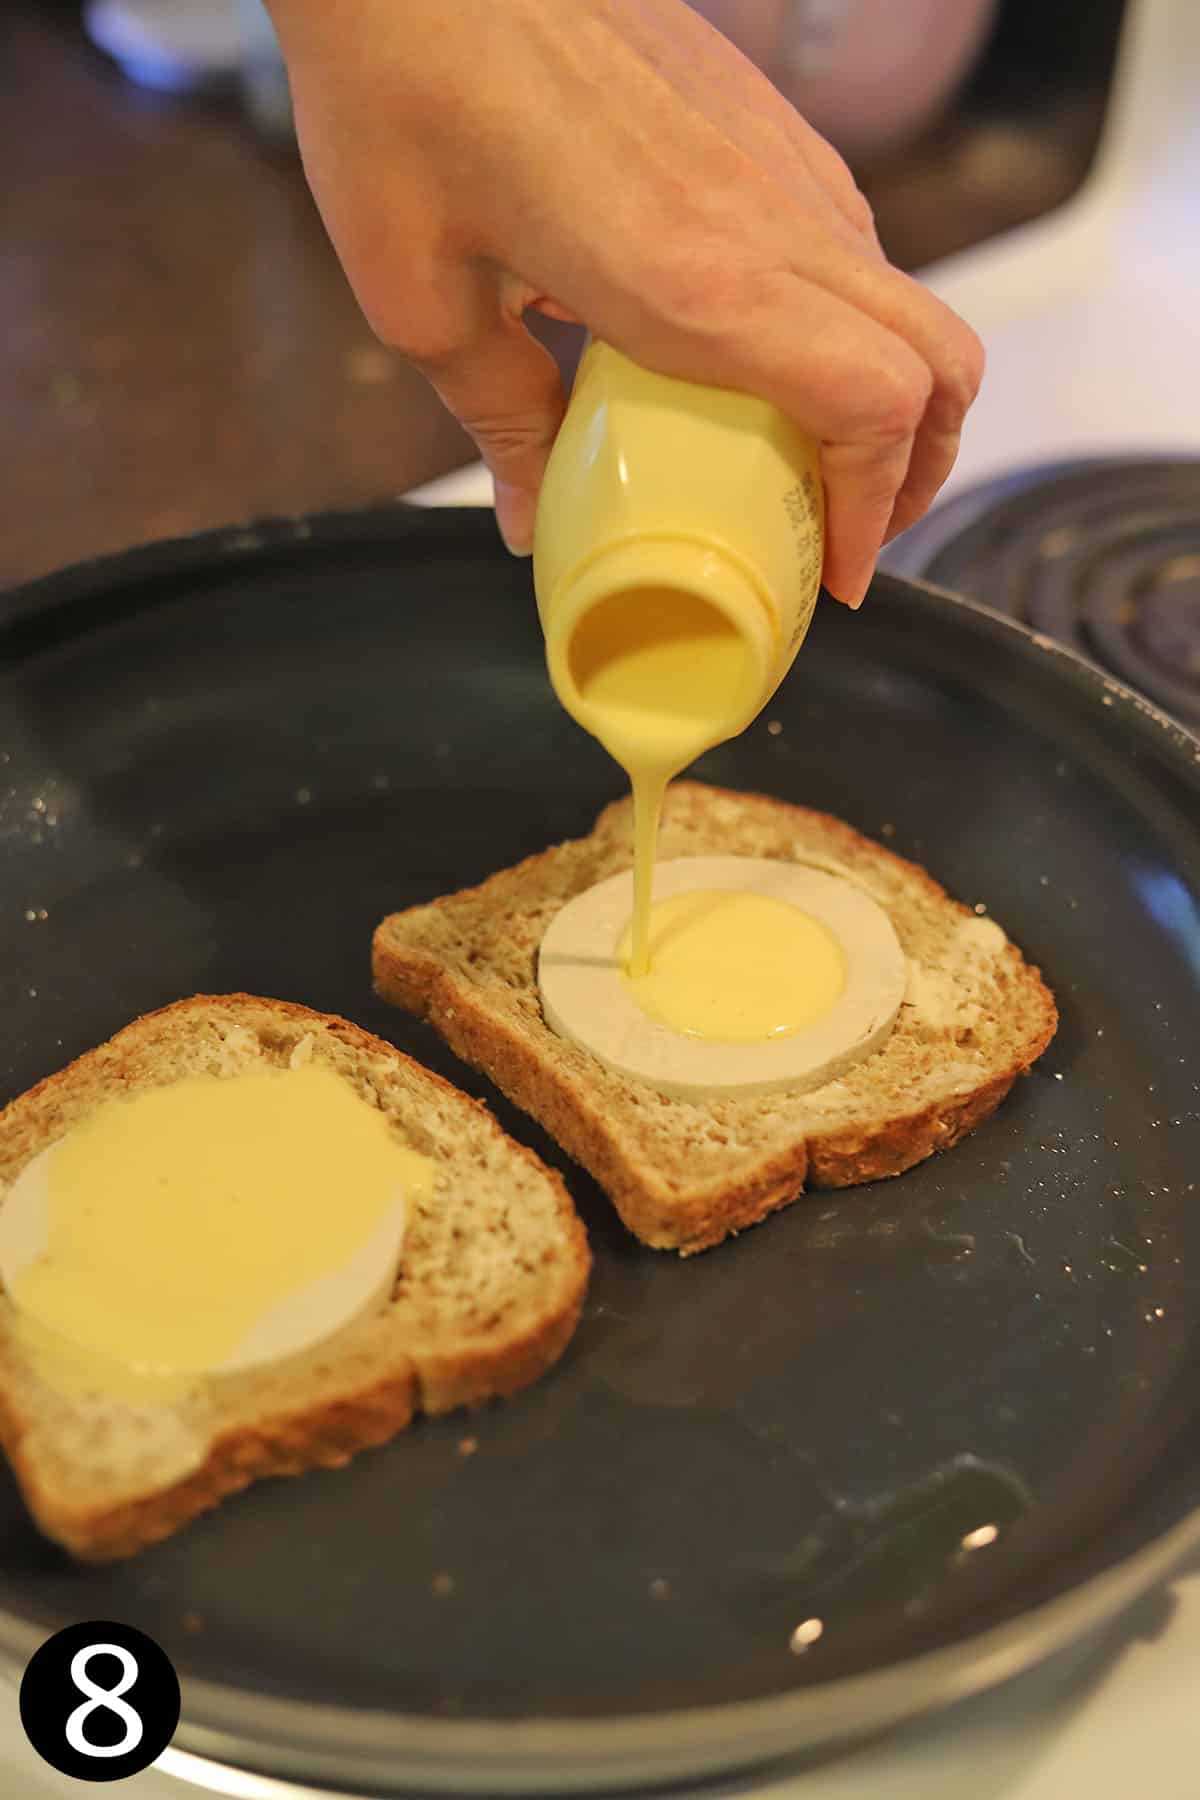 Just Egg being poured into tofu circles in bread.